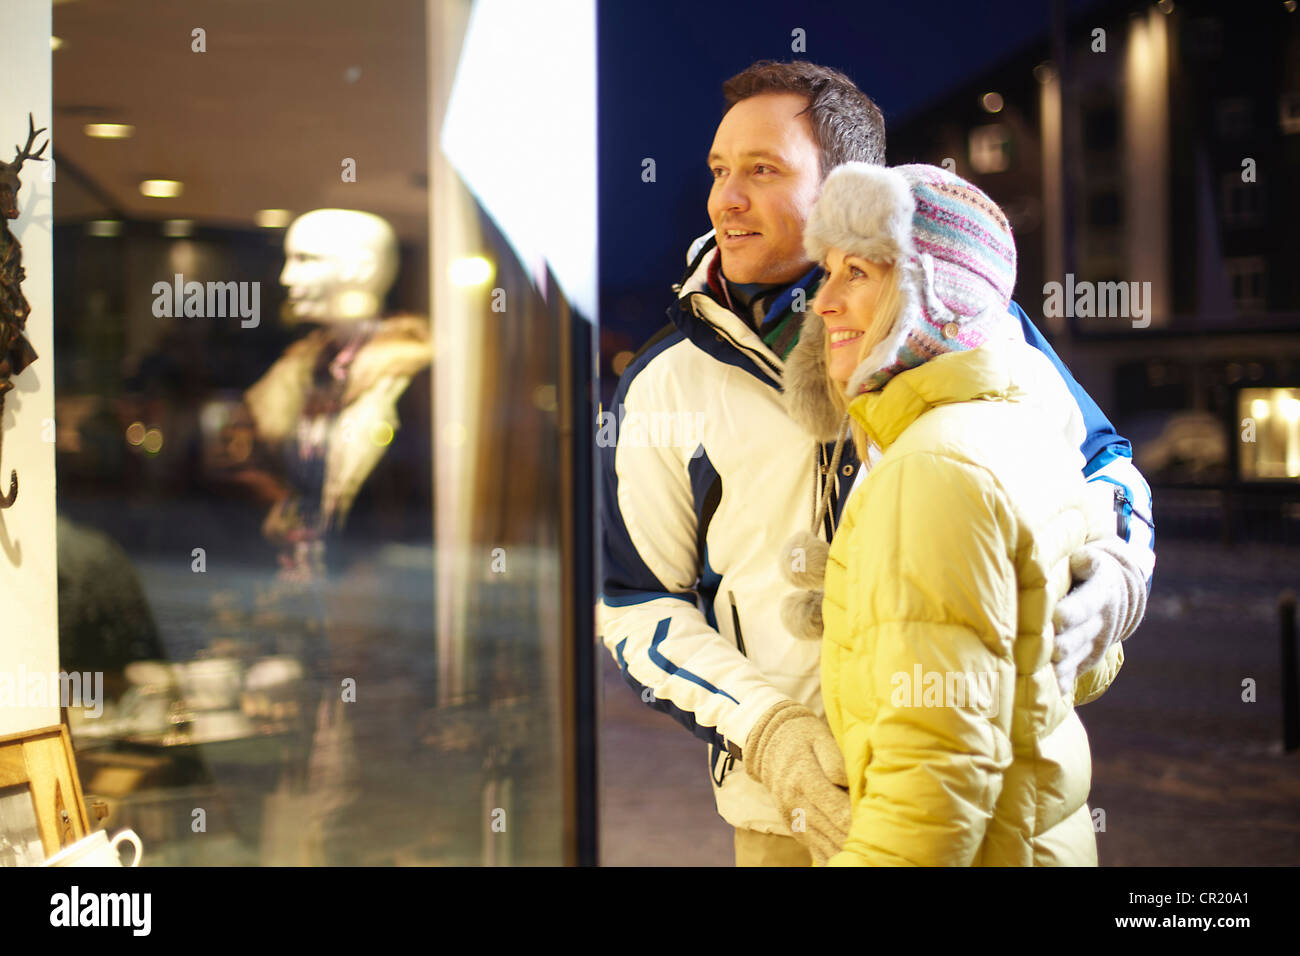 Couple window shopping together Banque D'Images